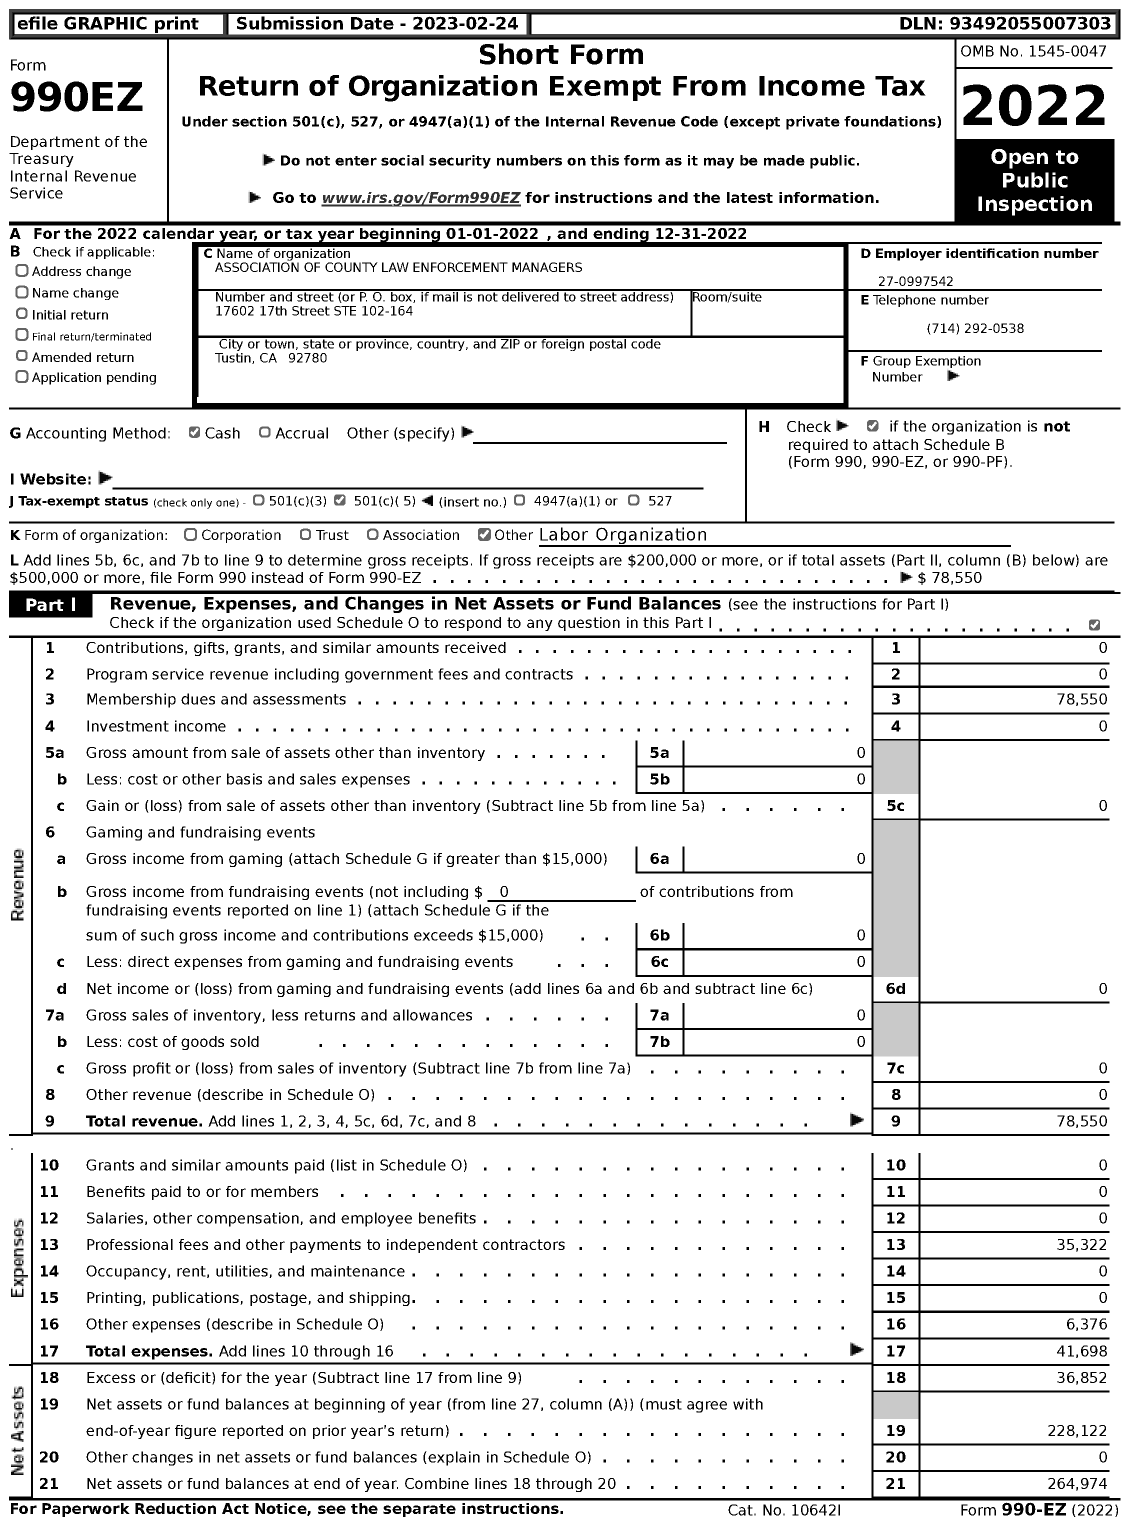 Image of first page of 2022 Form 990EZ for Association of County Law Enforcement Managers